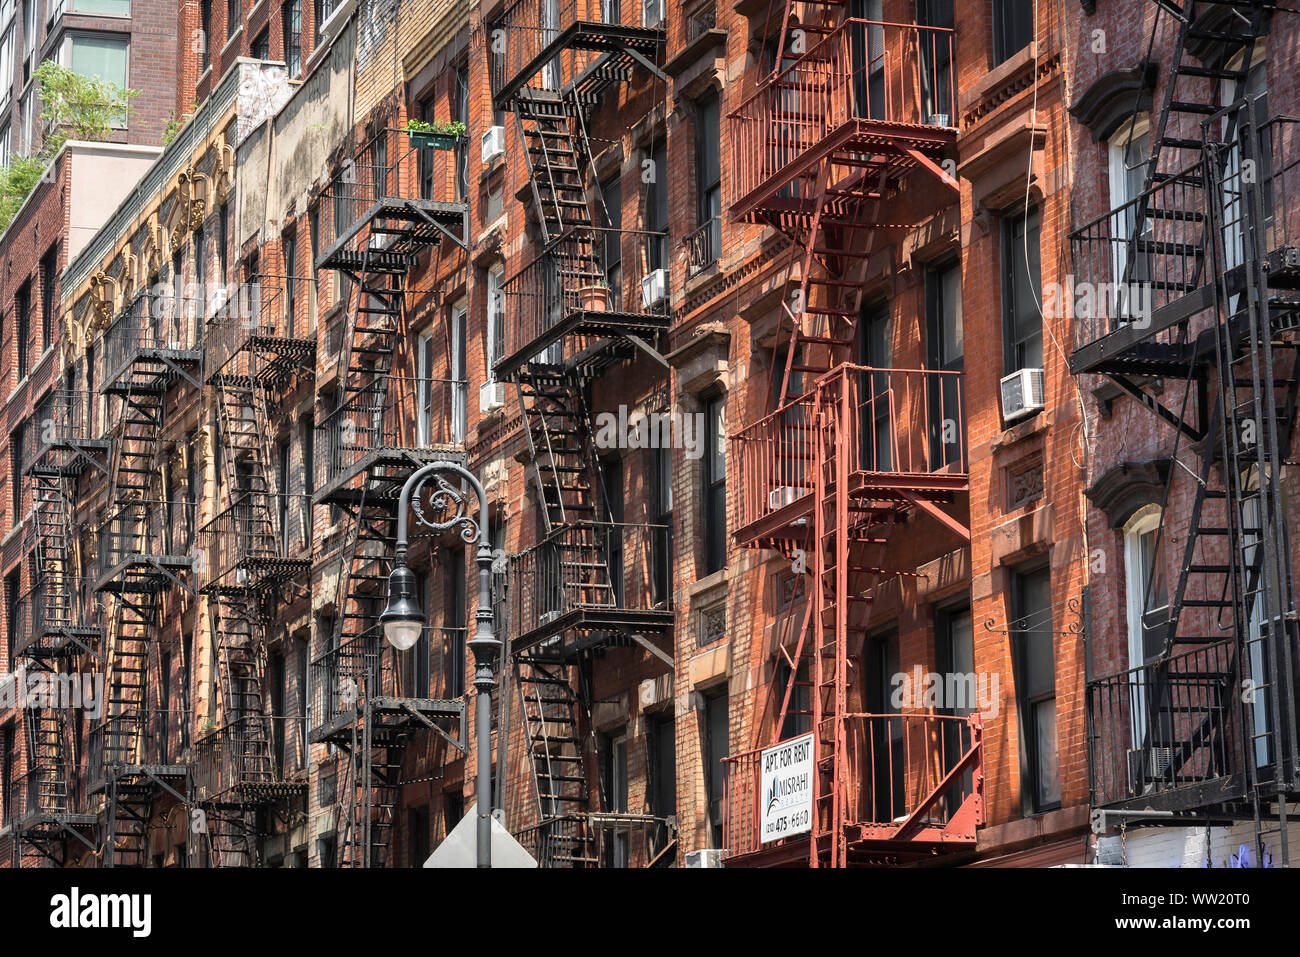 New York architecture, view of typical New York 19th century buildings with fire escape ladders attached, Lower East Side street, New York City, USA Stock Photo